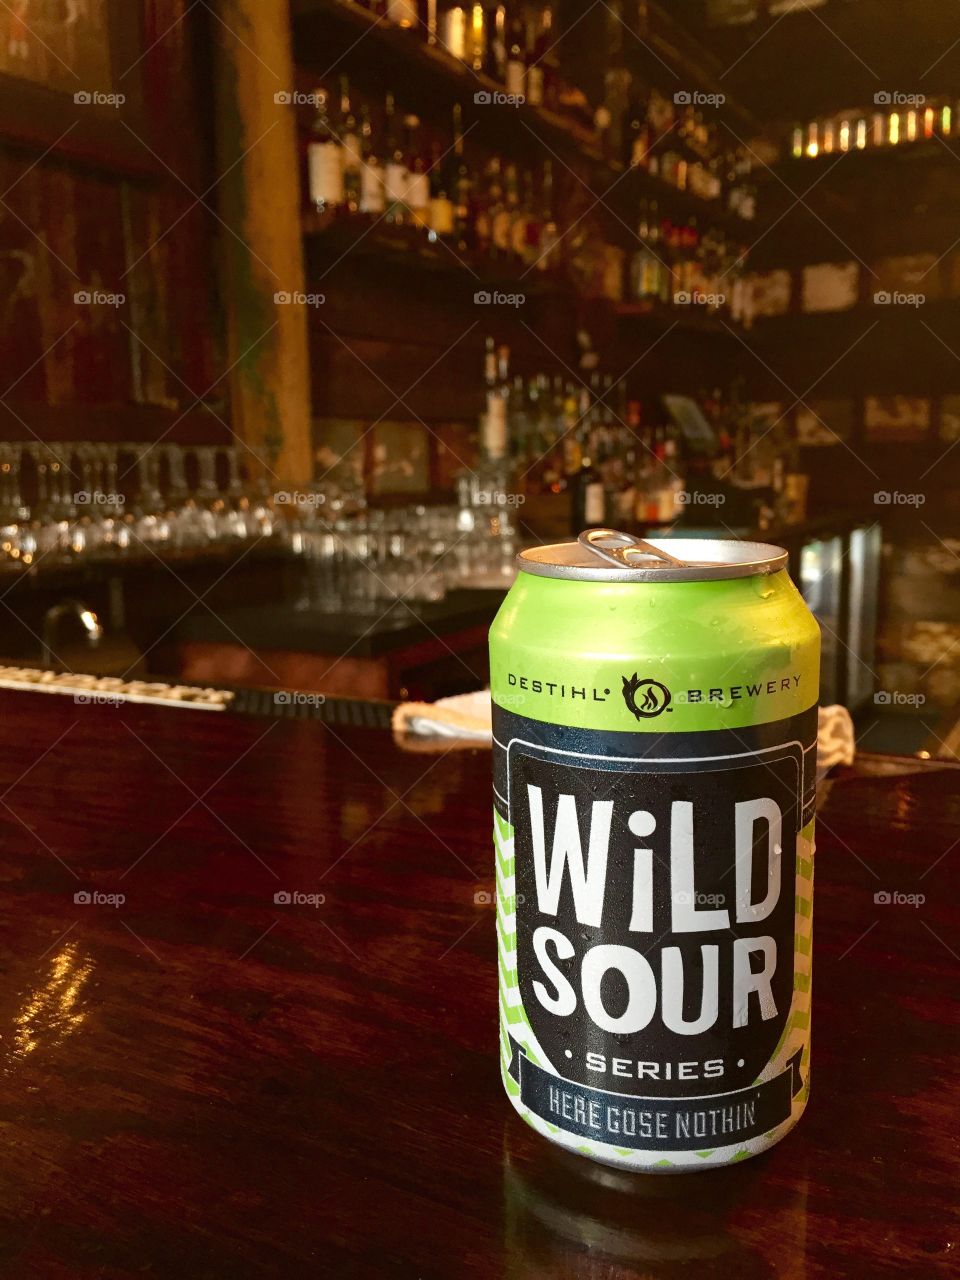 Wild Sour, Destihl Brewery. Taken in Black Penny, a beer bar in New Orleans on Rampart.